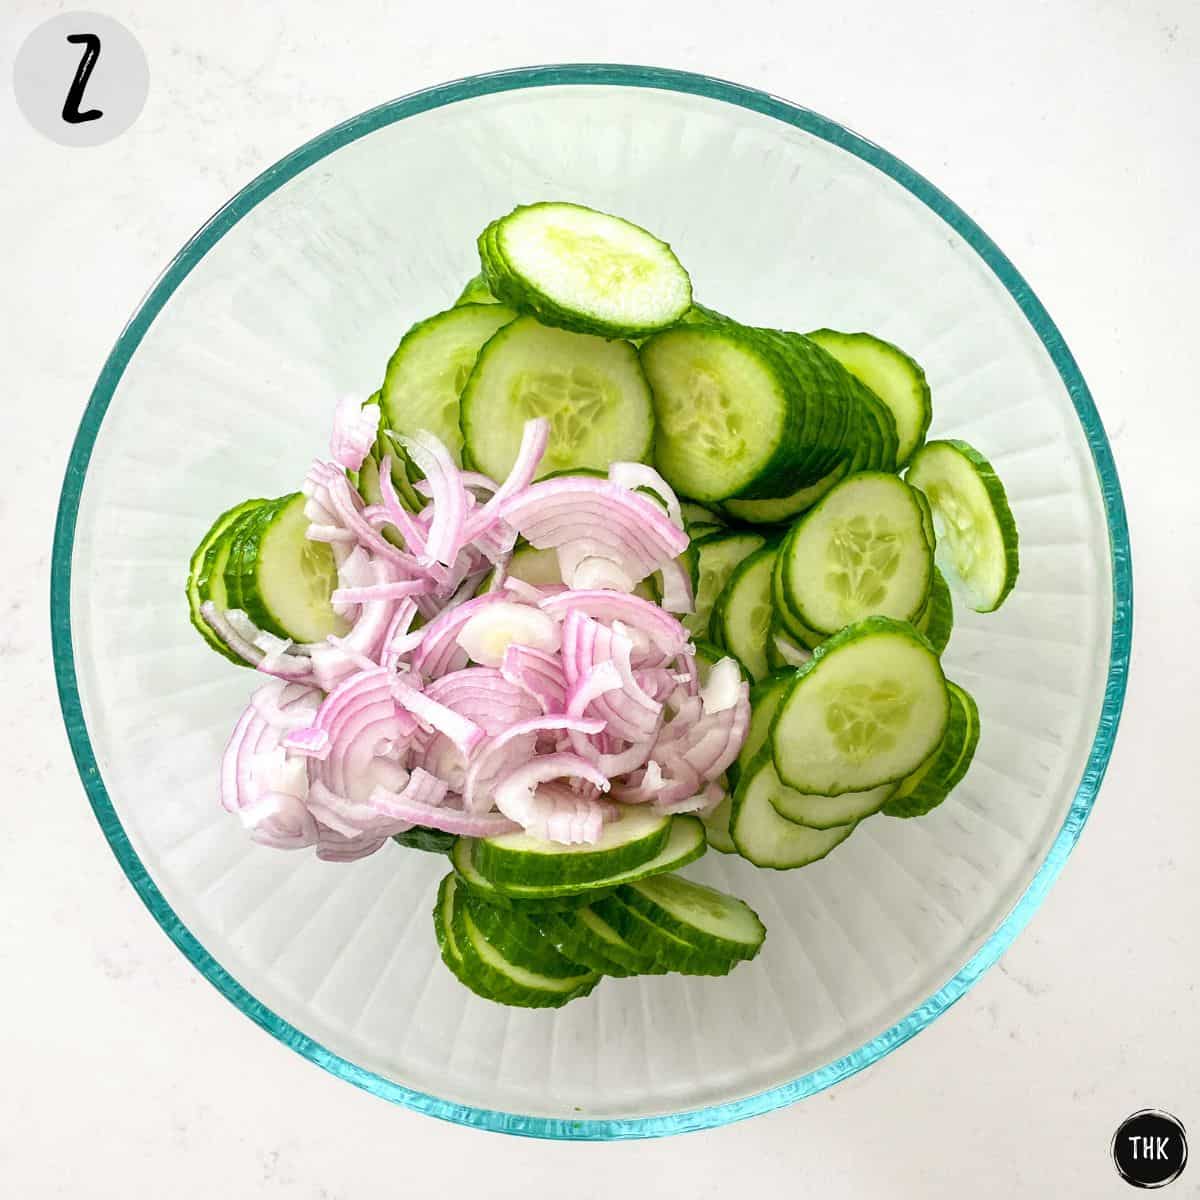 Cucumber slices and red onion in large glass bowl.